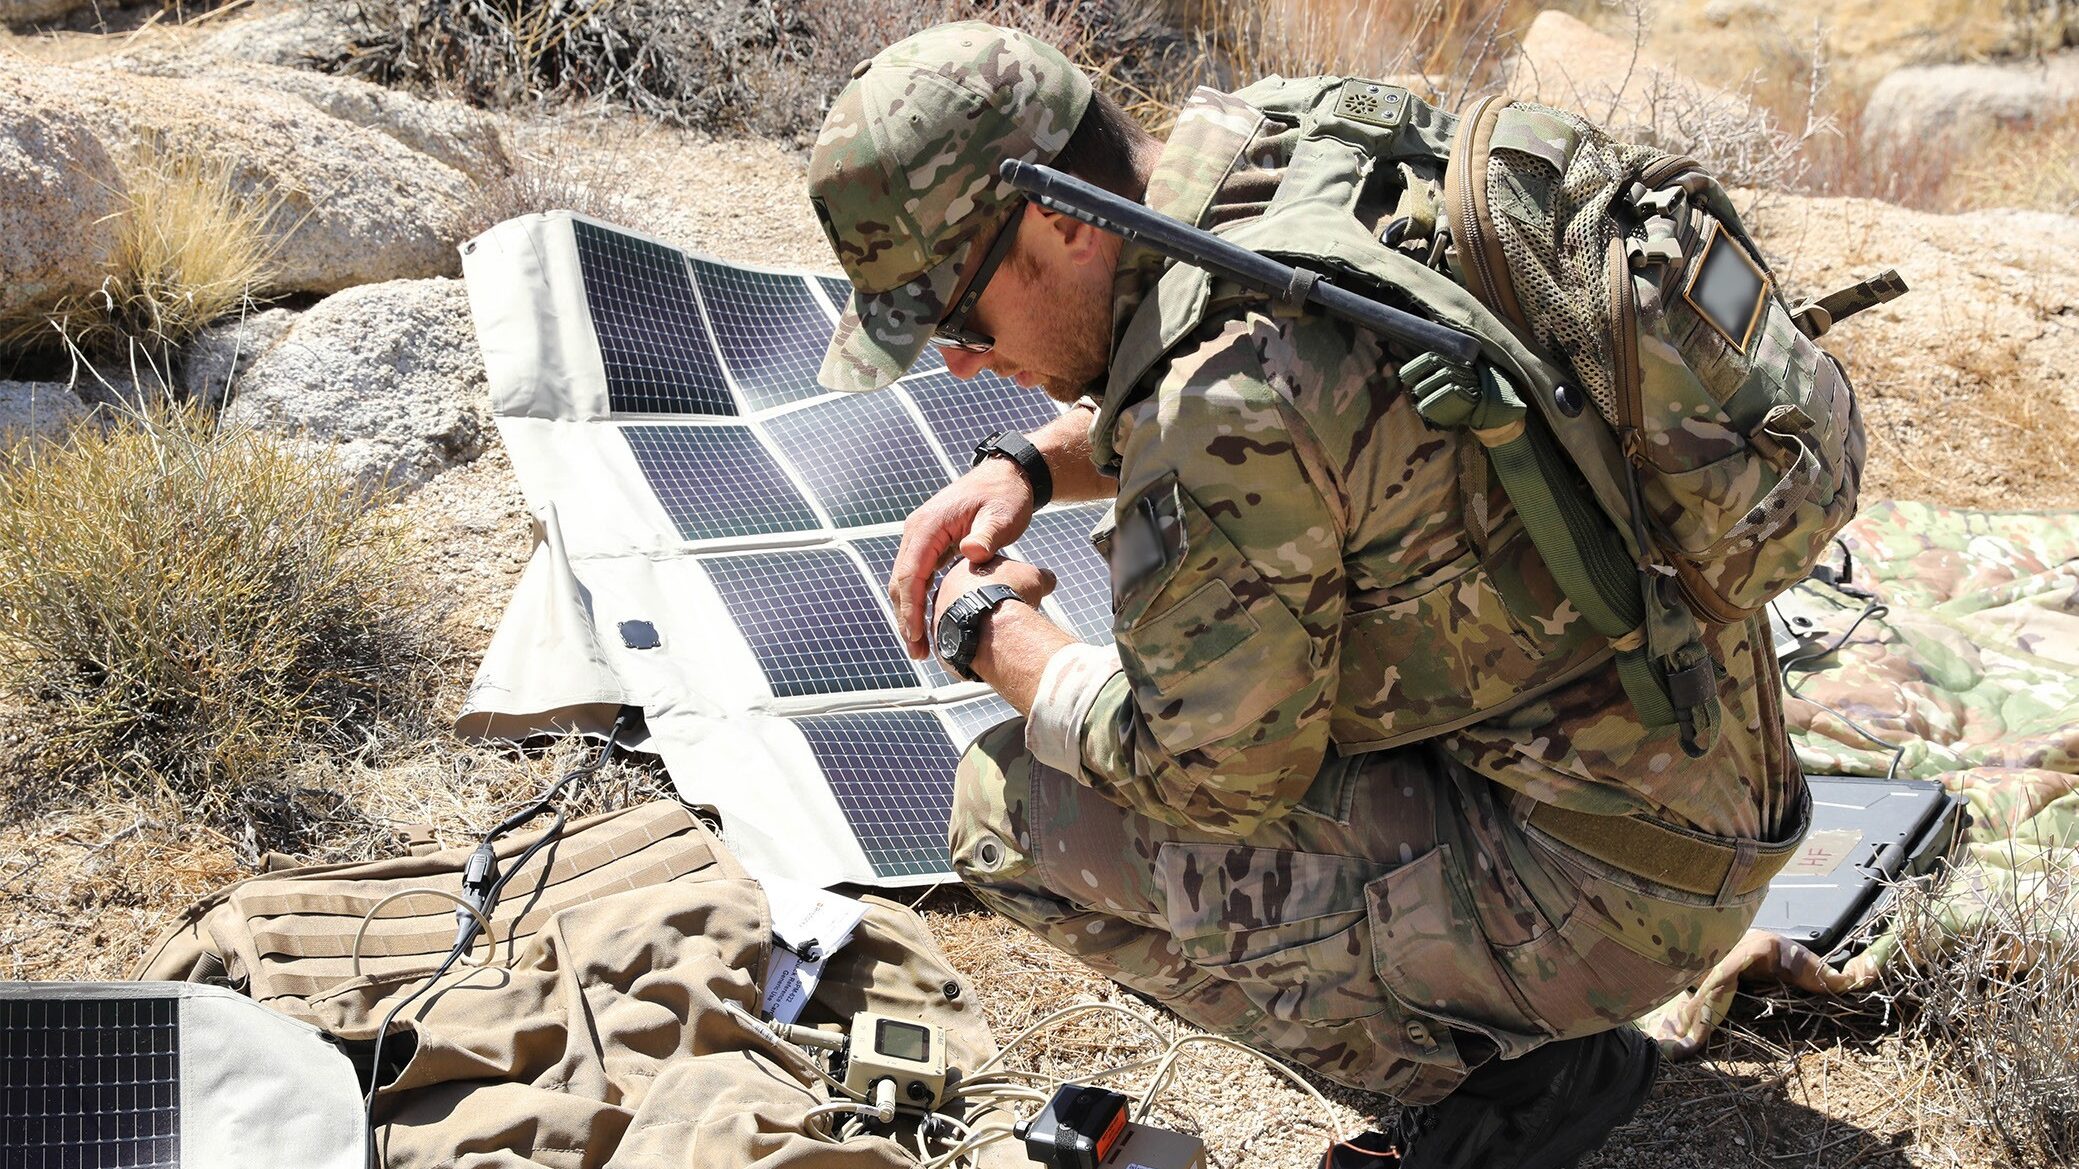 Racing to ‘adapt,’ Army estimates climate plan will cost over $6.8B over 5 years